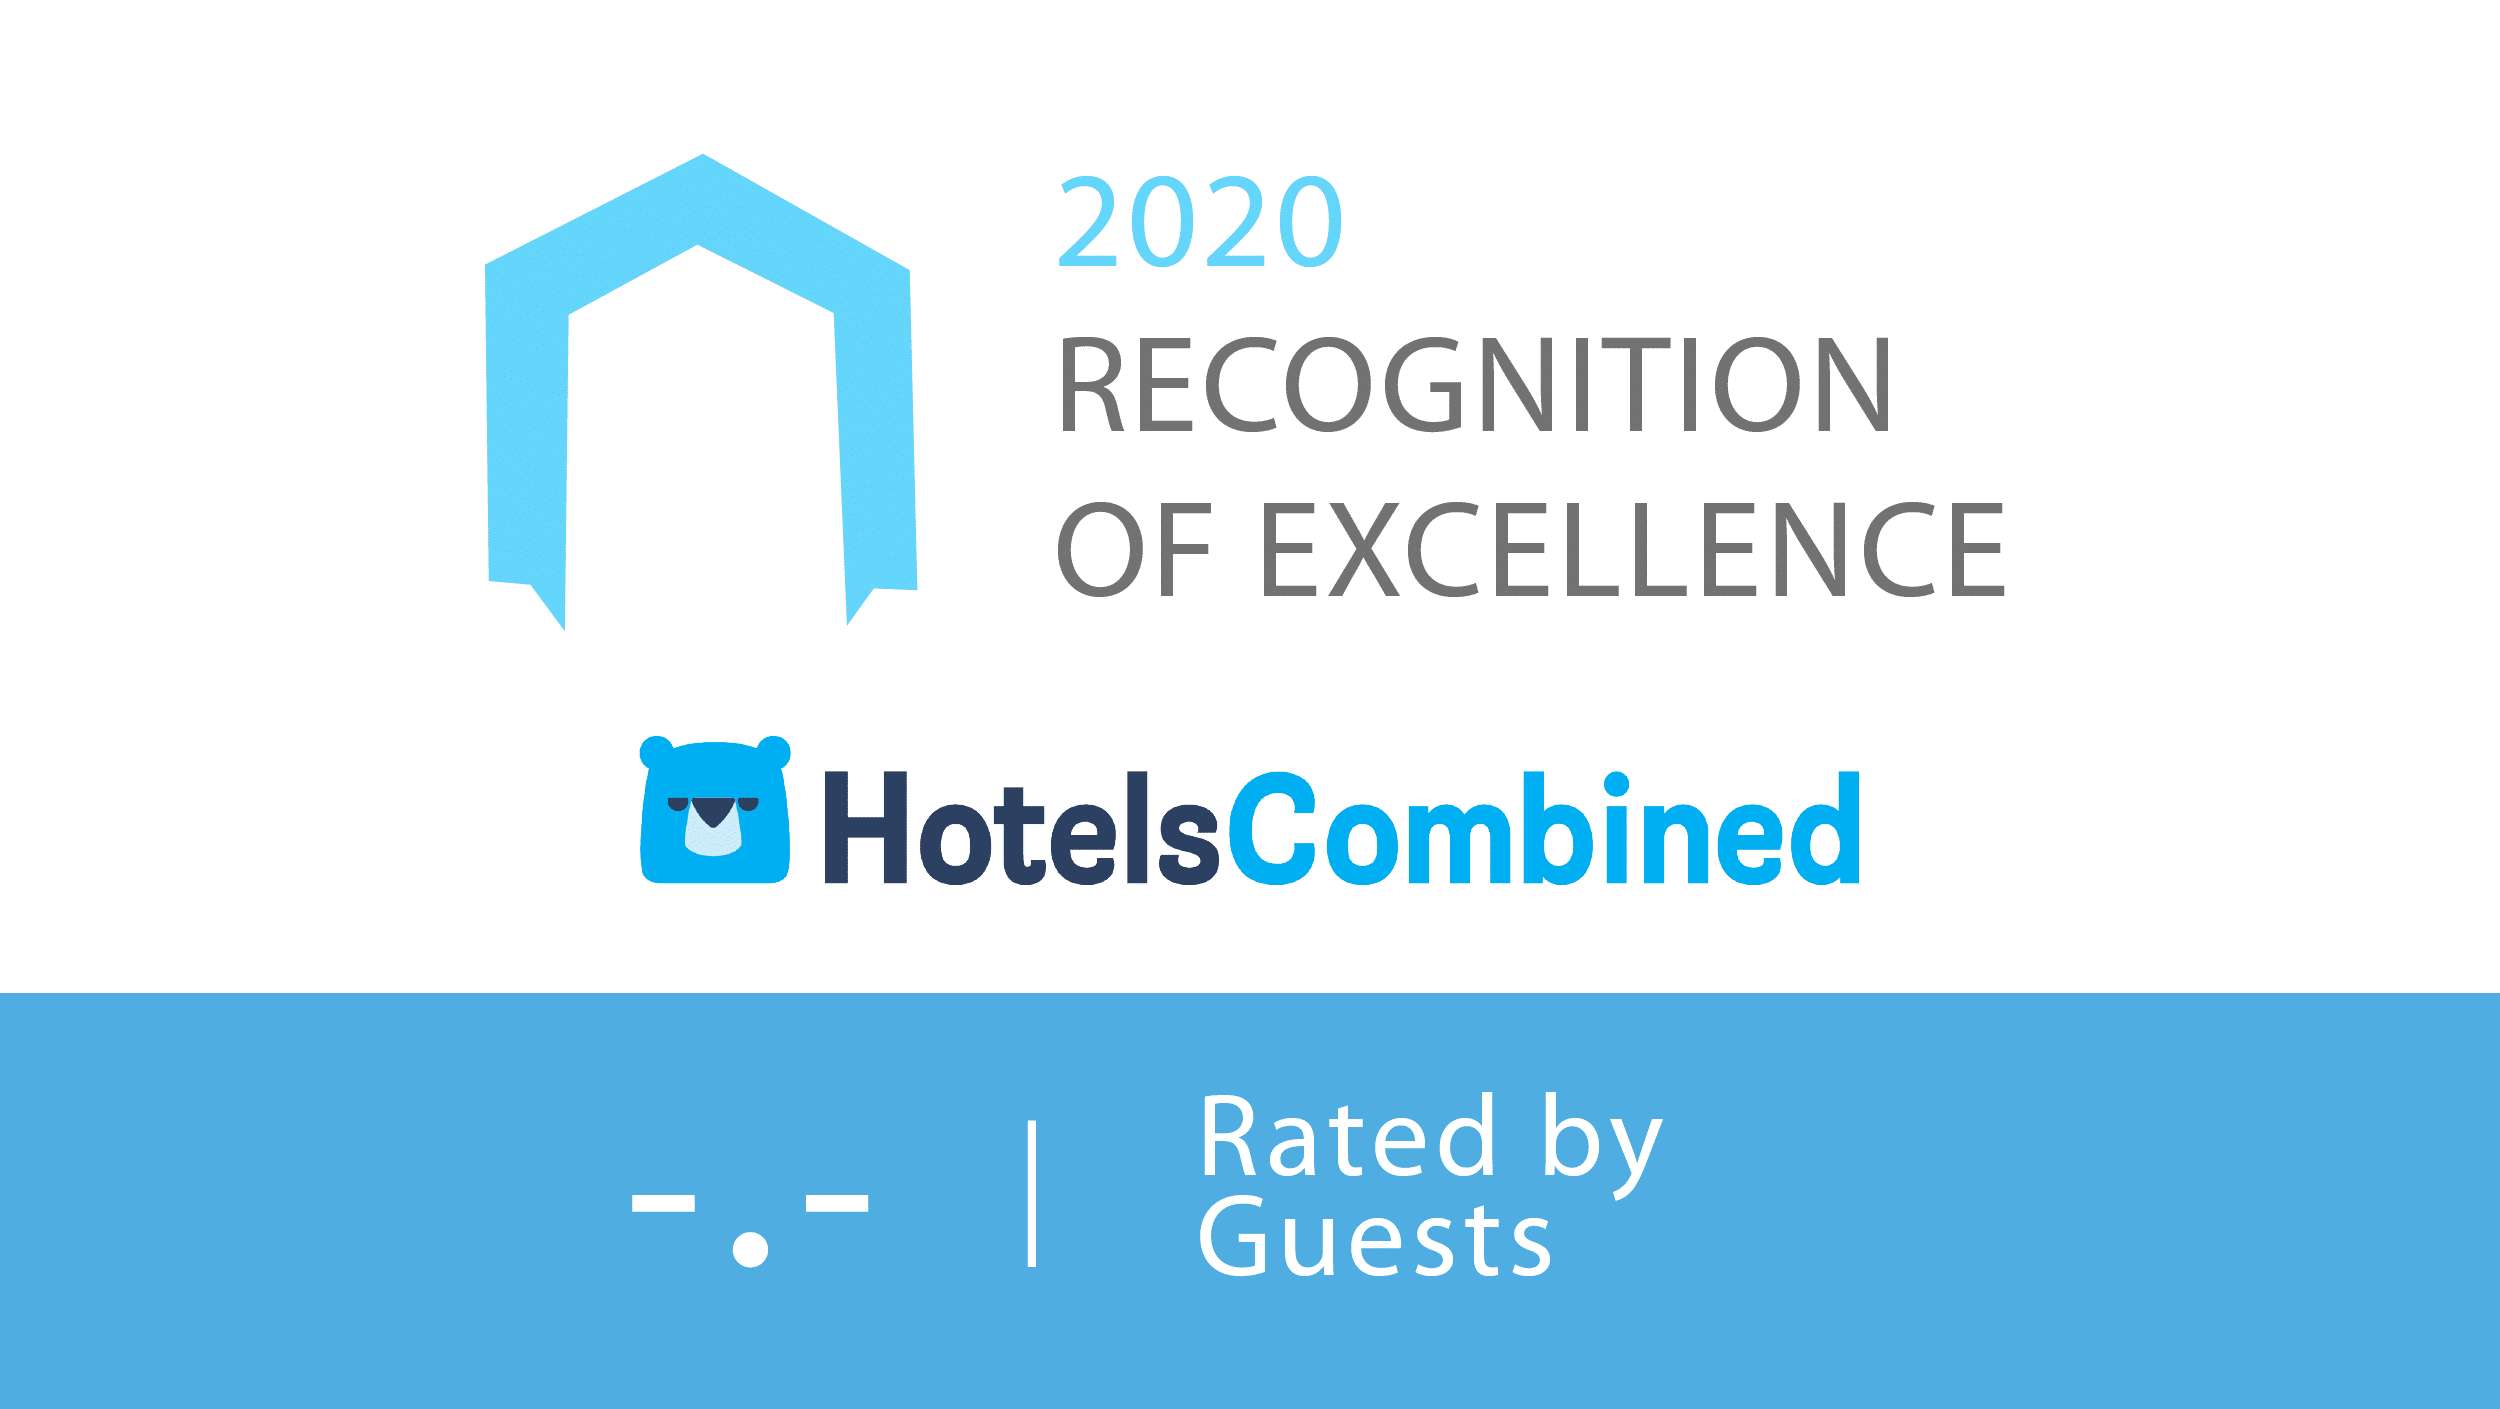 HotelsCombined Award - 2020 Recognition of excellence award